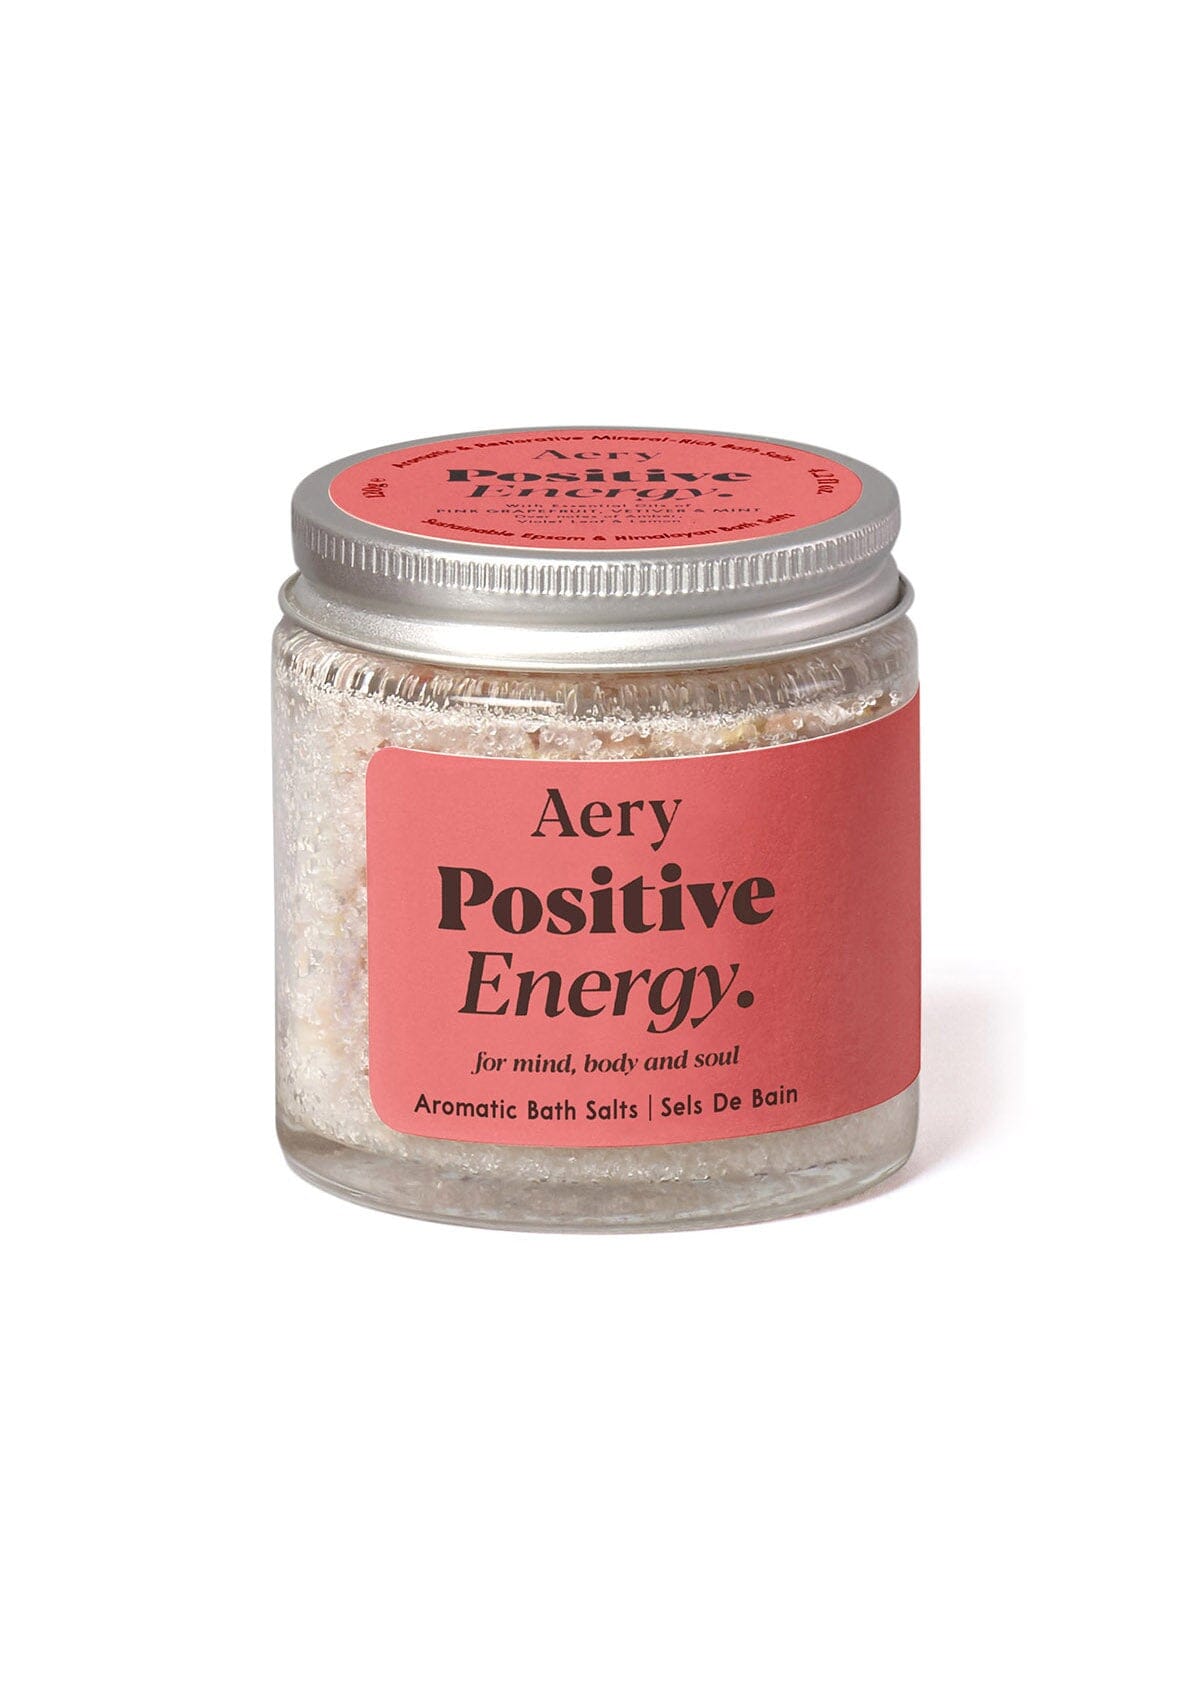 Red Positive Energy bath salts by Aery displayed on white background 